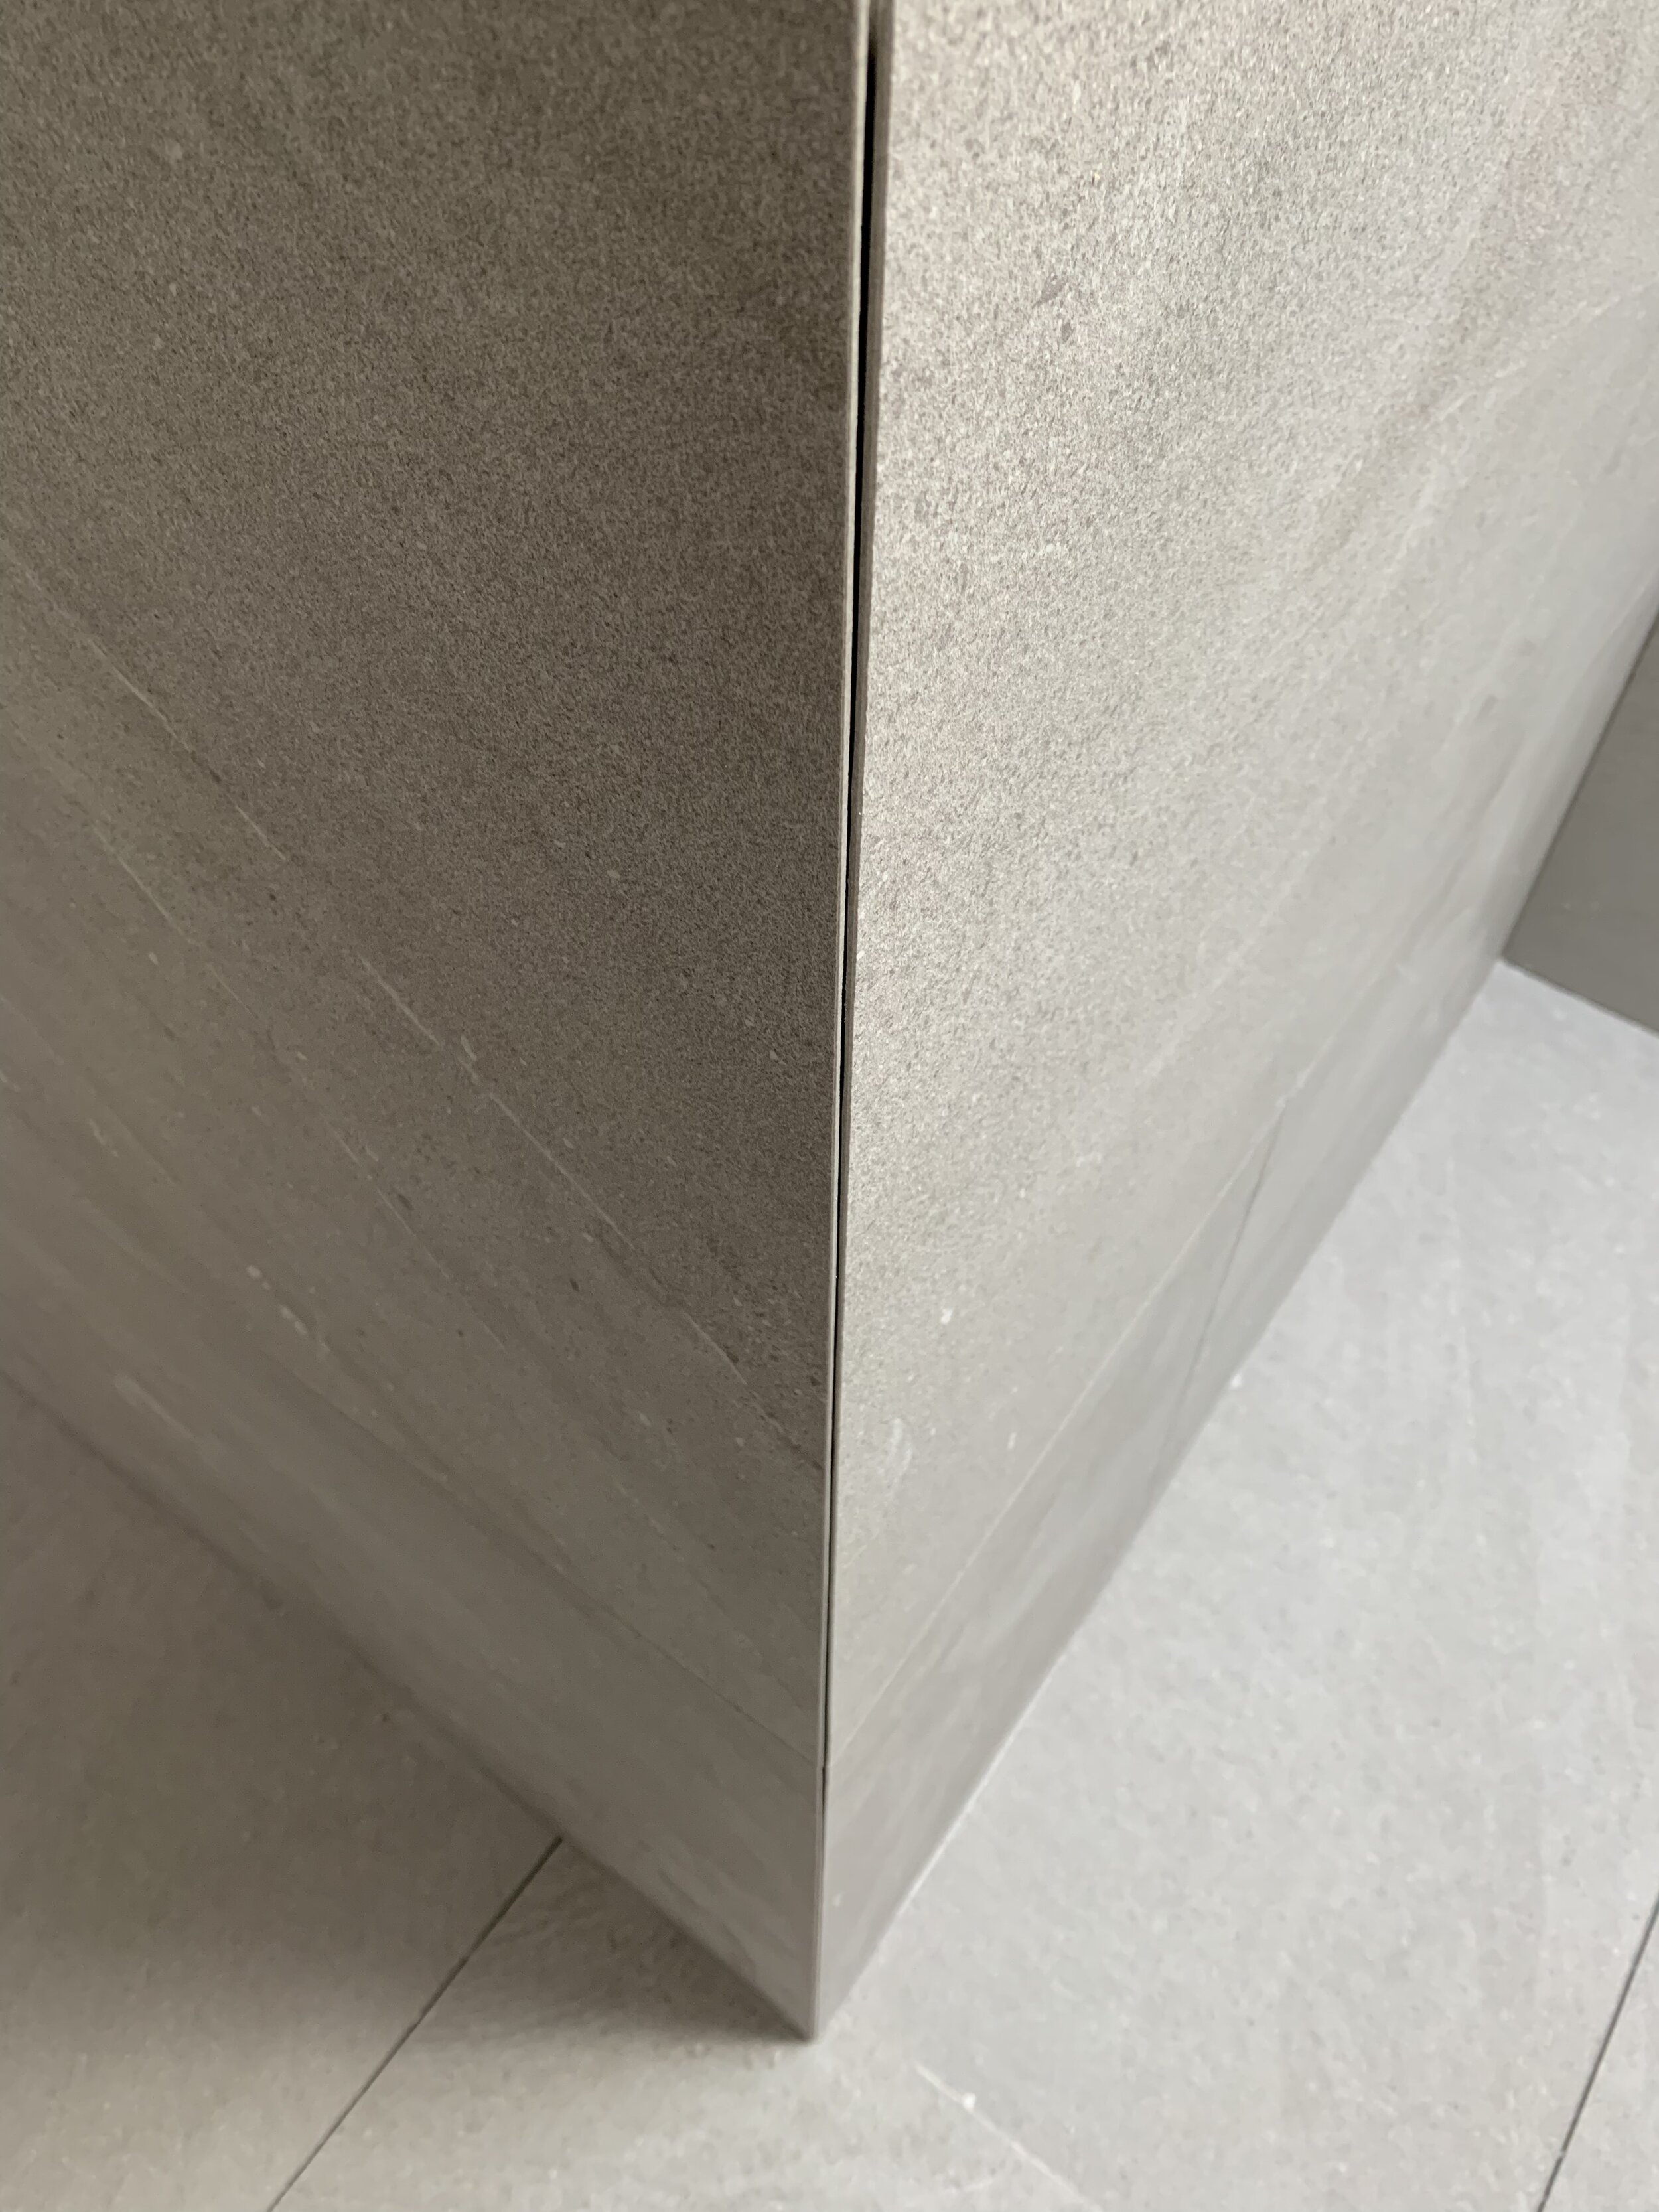 The Truth About Mitres Mitring Tiles, Shower Tile Edge Options